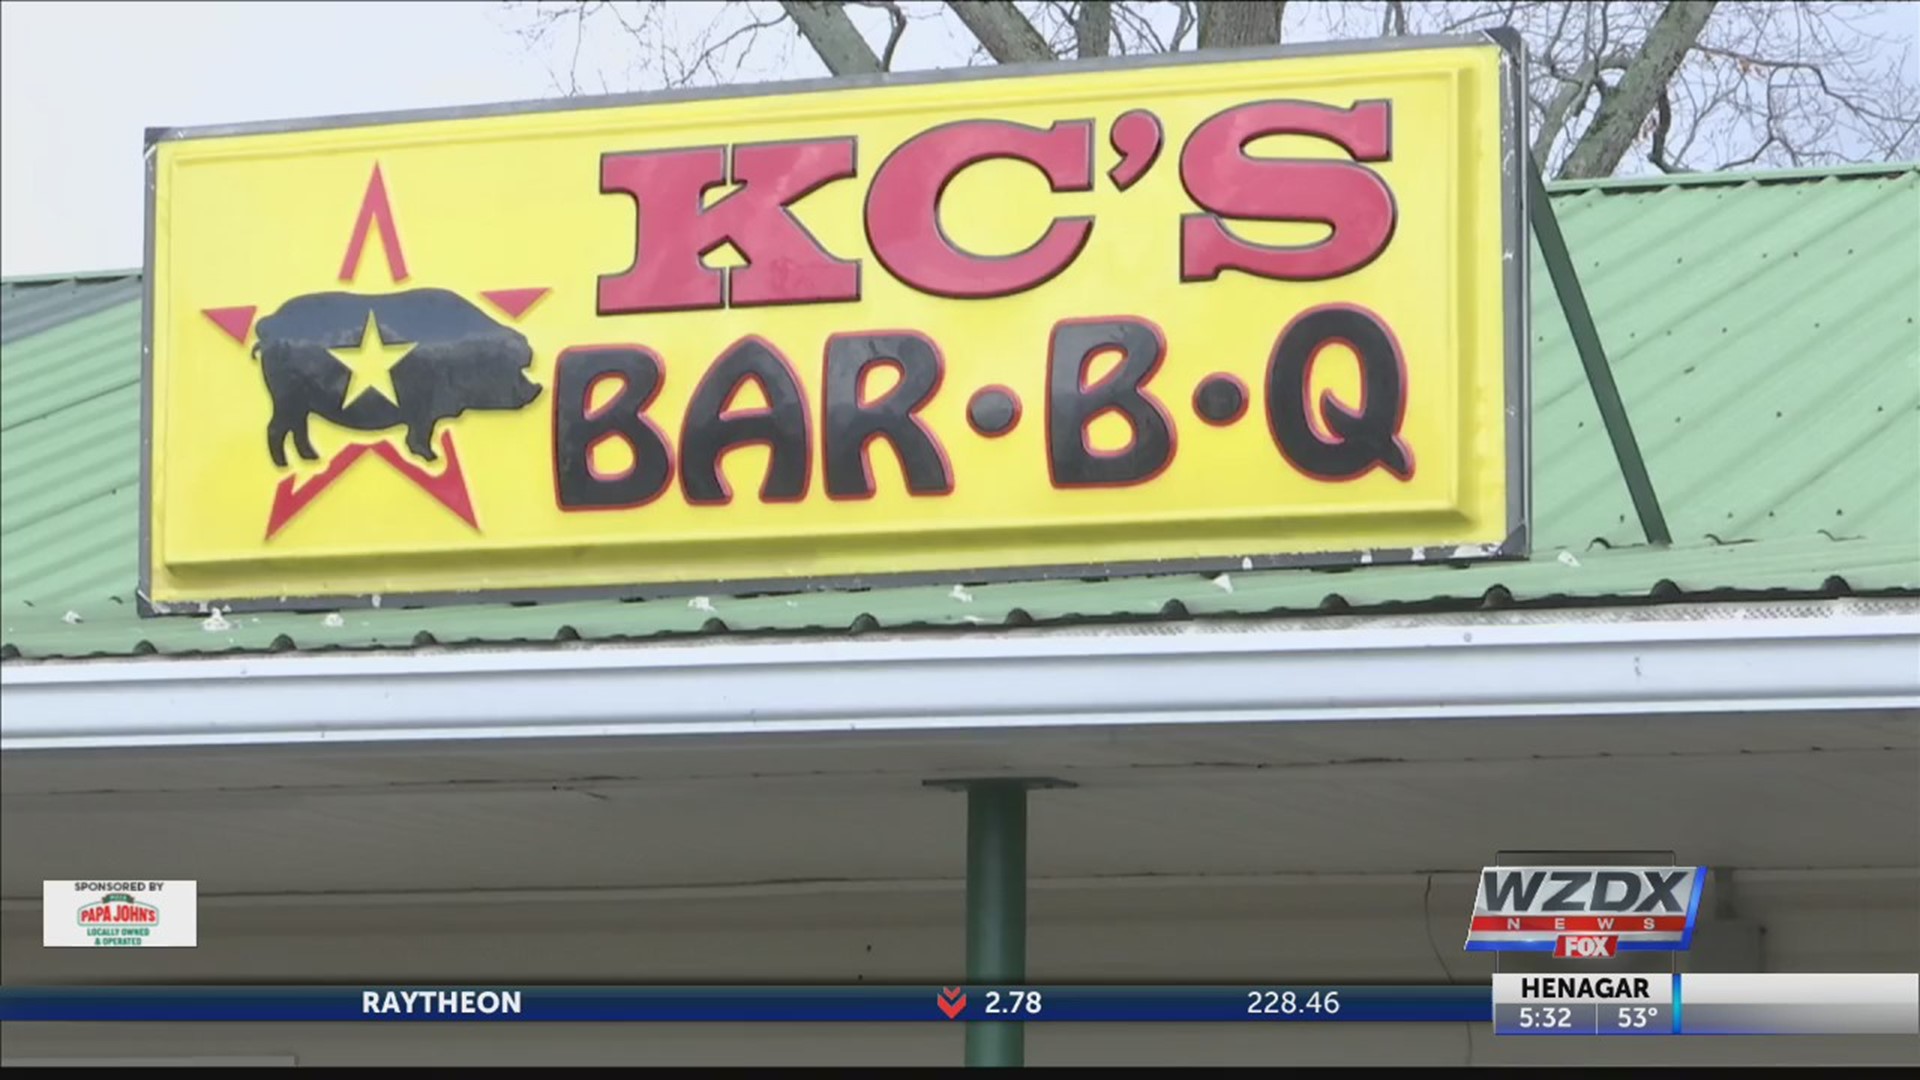 Despite the tragedy here, there's been an outpouring of support here in Scottsboro, including KC's Bar-B-Q. They've been able to feed first responders, as well as the Red Cross who are assisting people who lived out on those boats - who are now displaced.